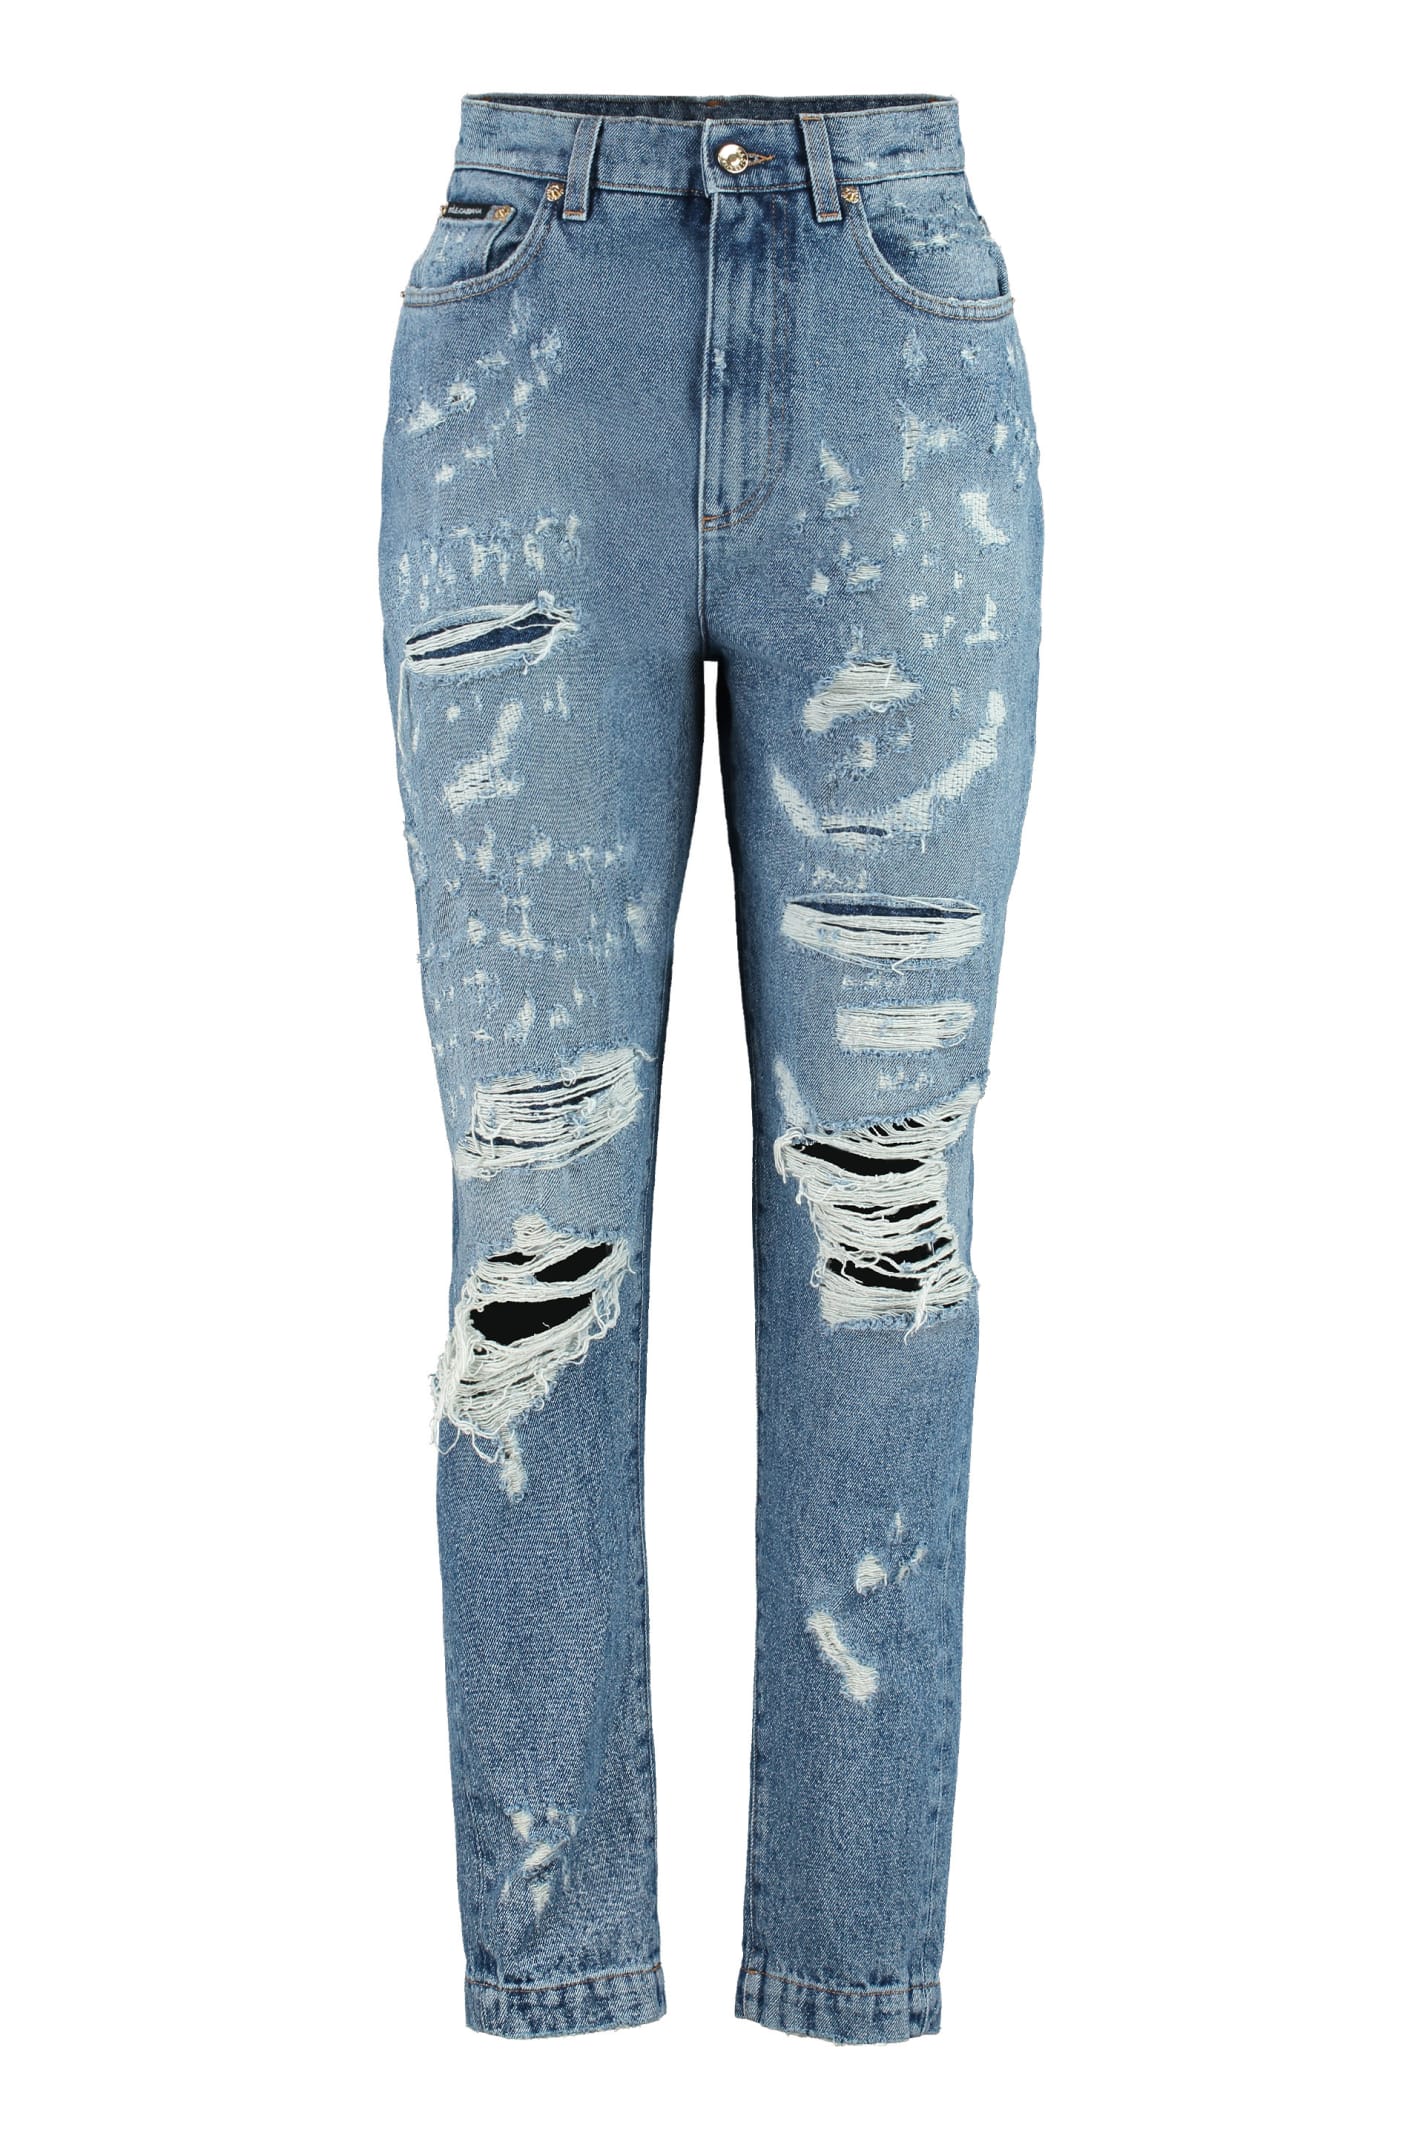 Dolce & Gabbana Amber Worn-out Details Jeans